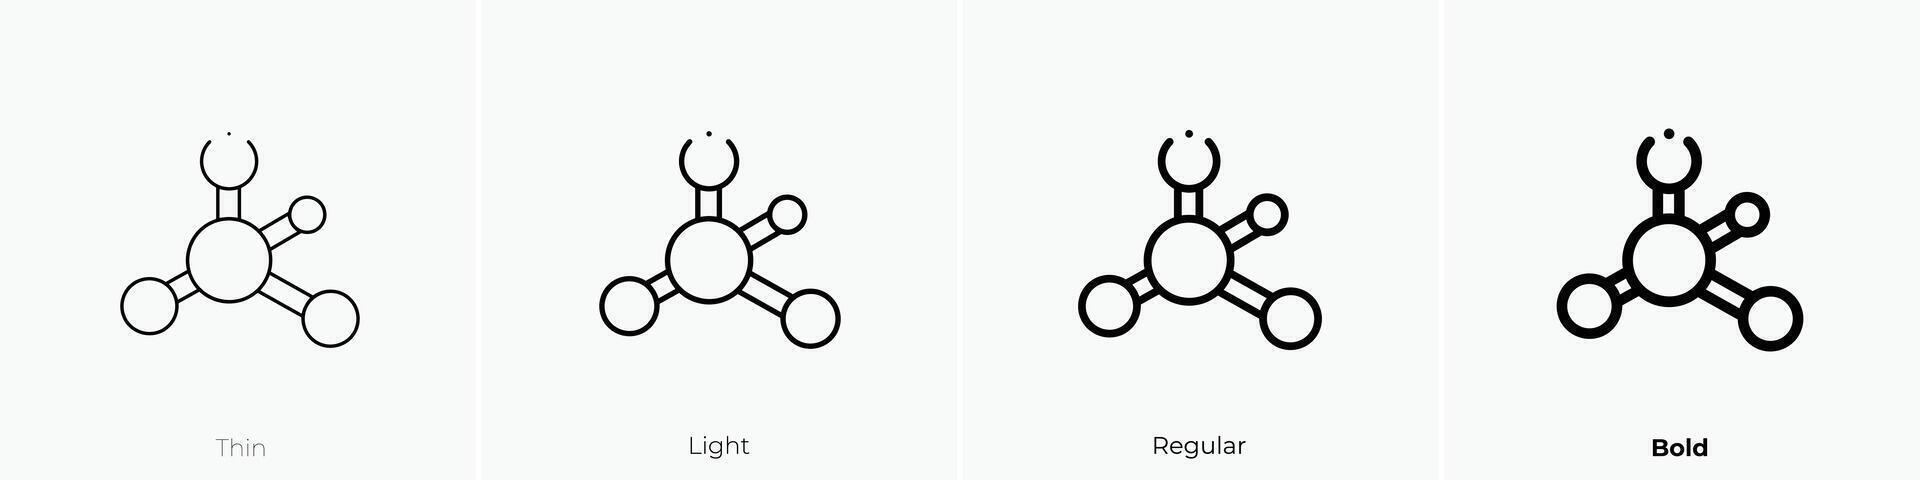 molecule icon. Thin, Light, Regular And Bold style design isolated on white background vector